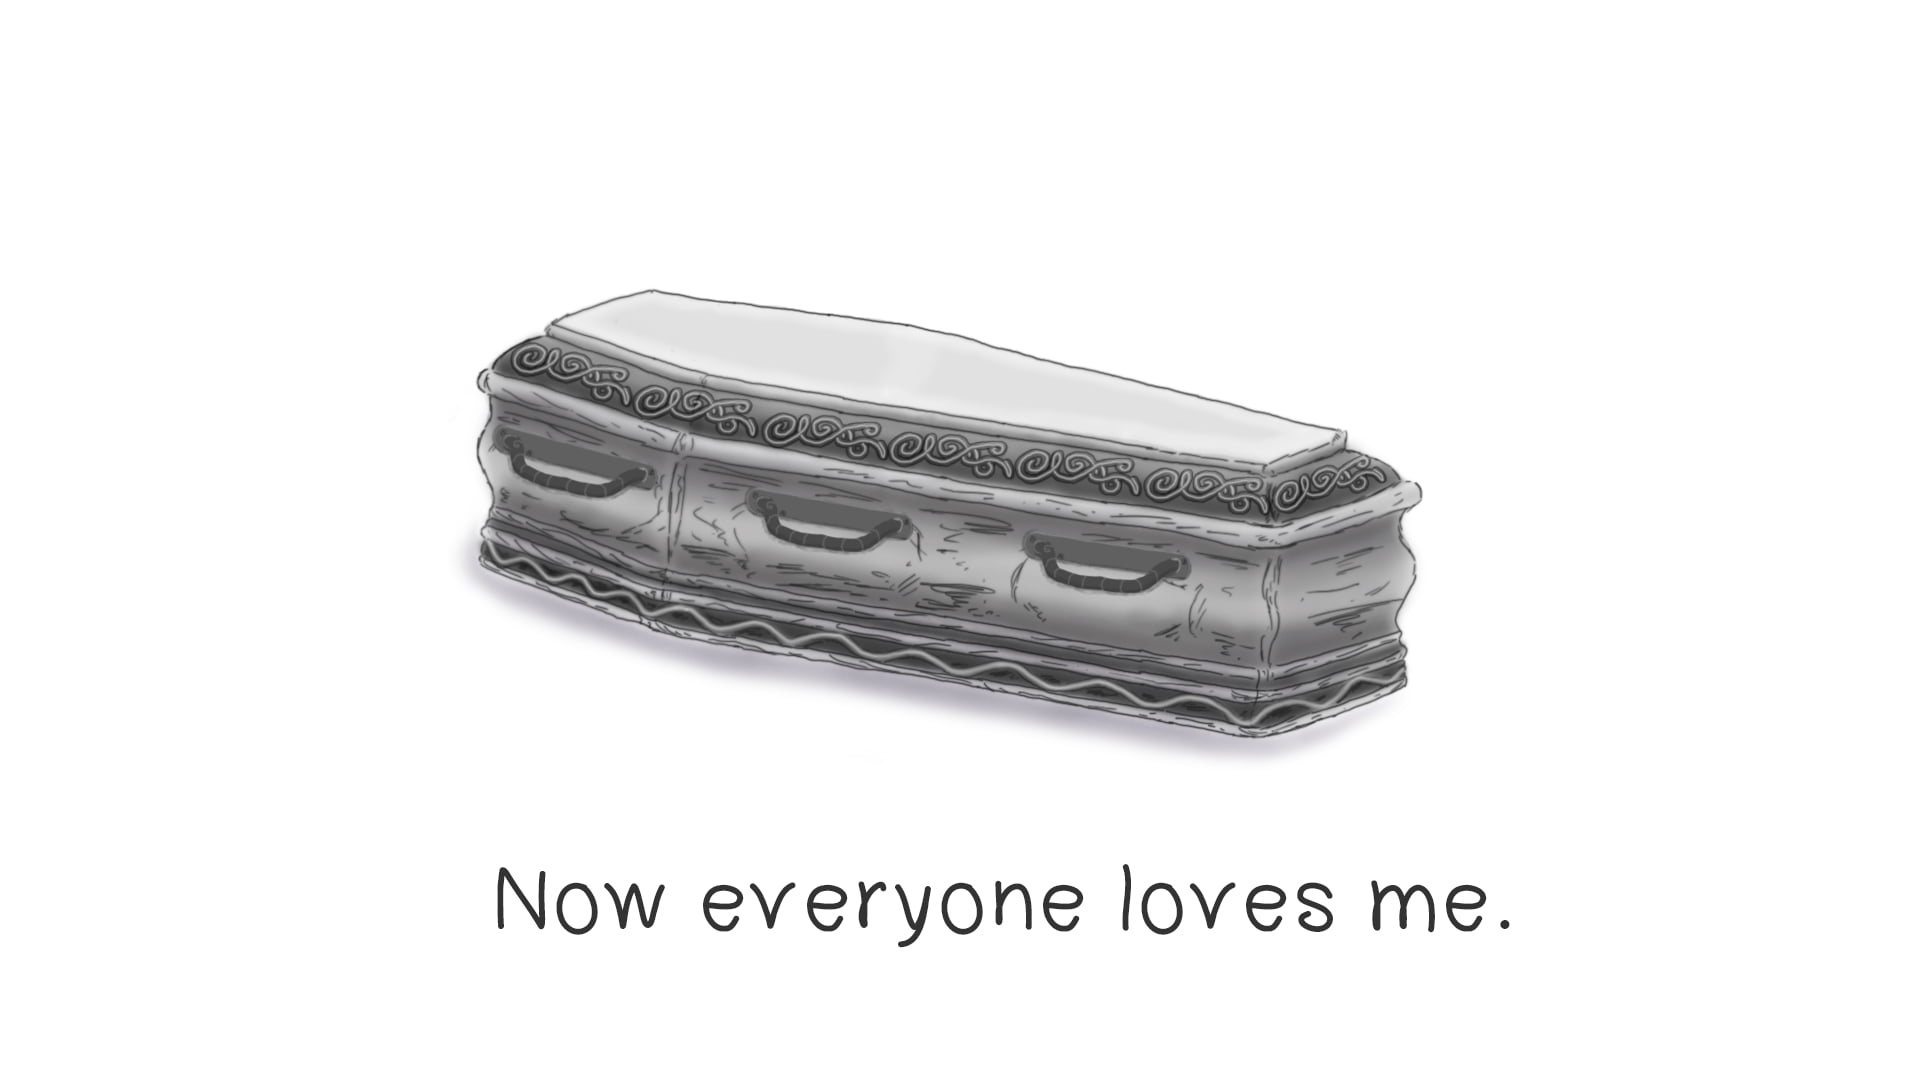 gray and white coffin illustration with text overlay, minimalism, death, love, white